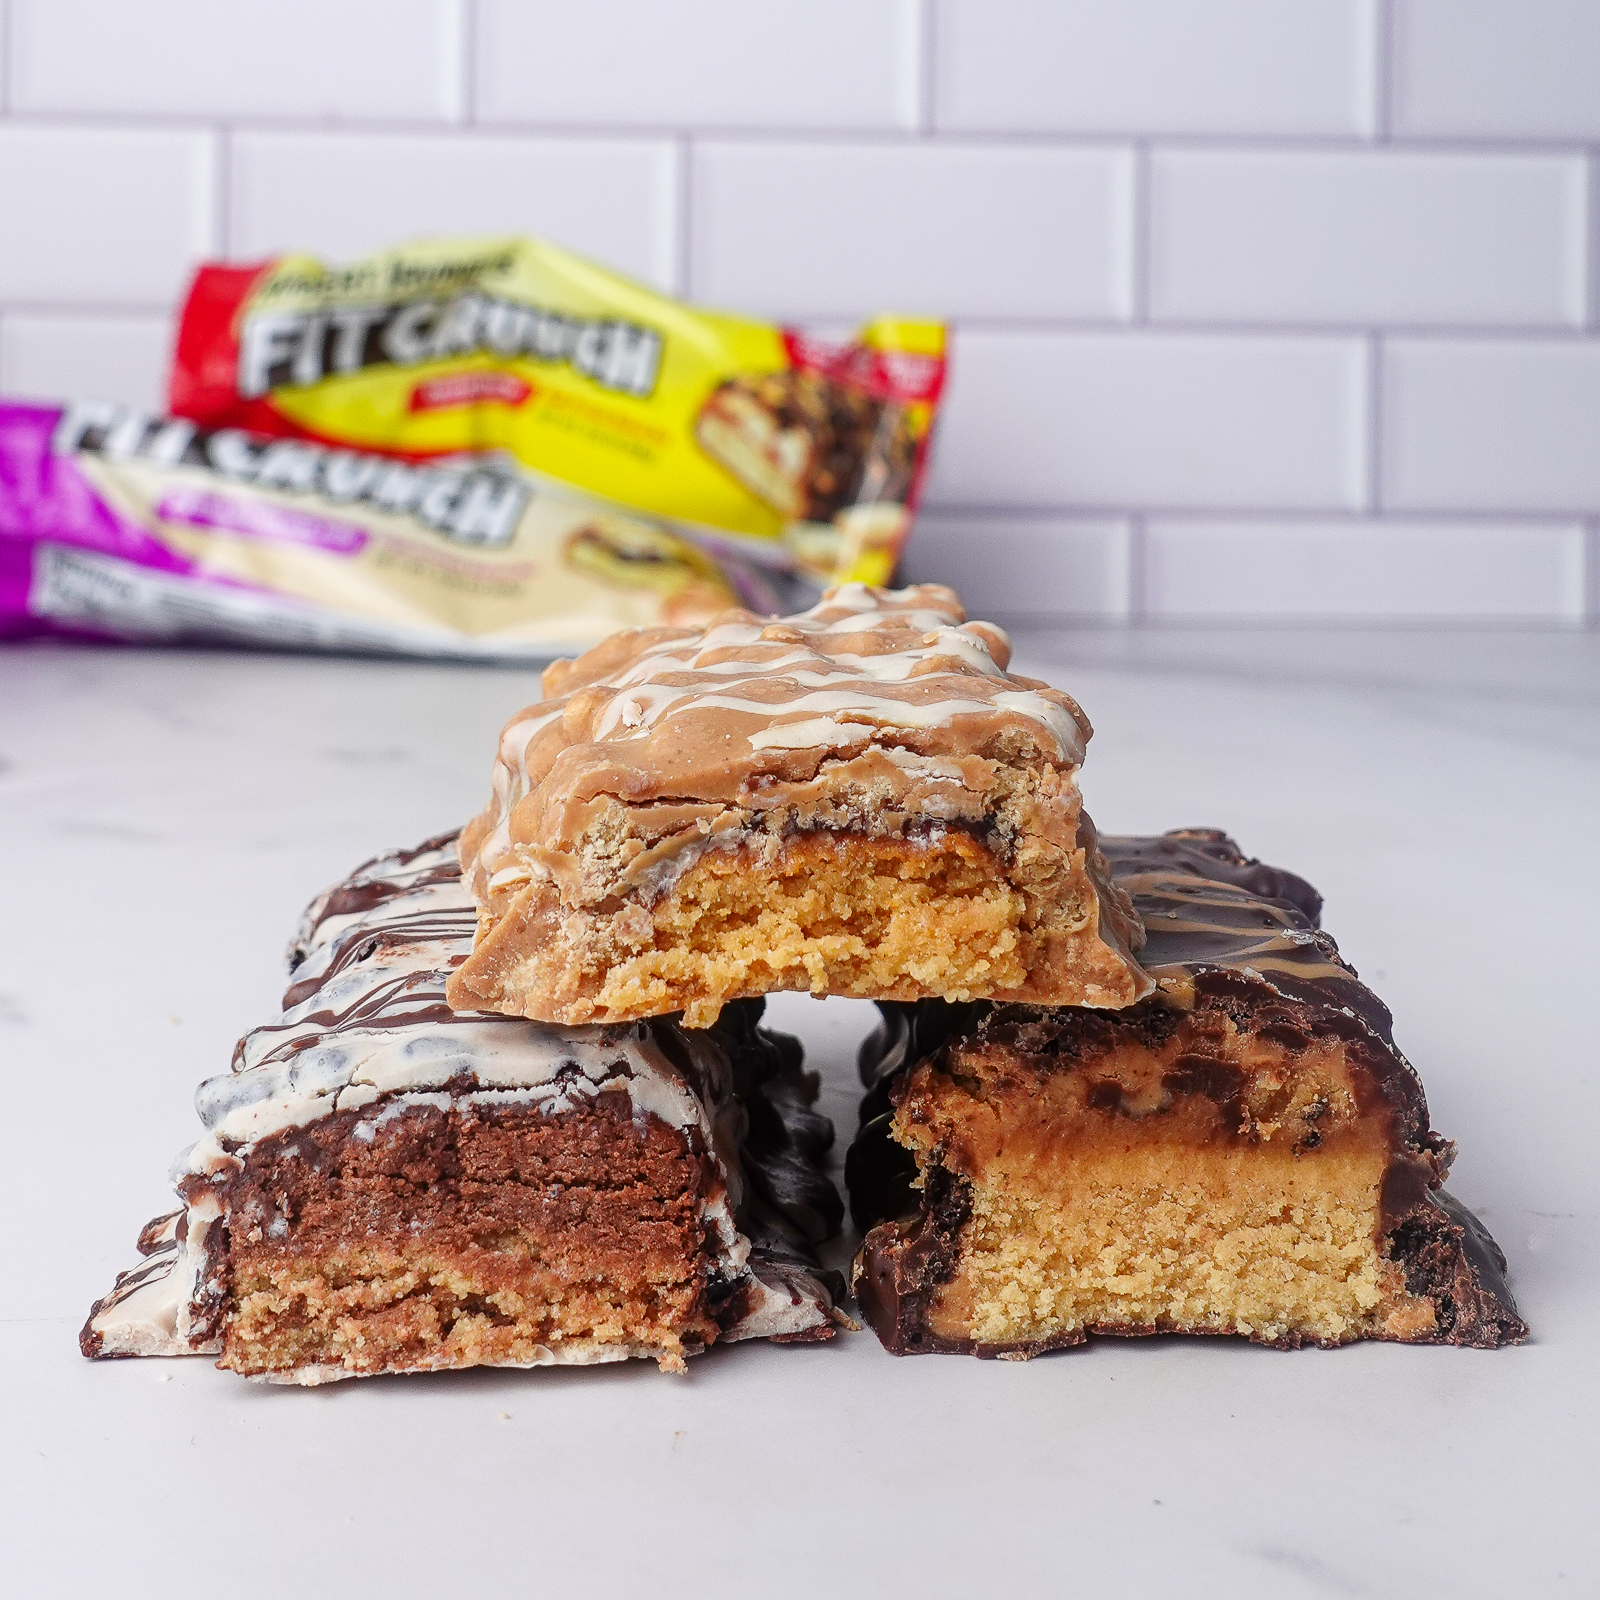 Fit Crunch Bars